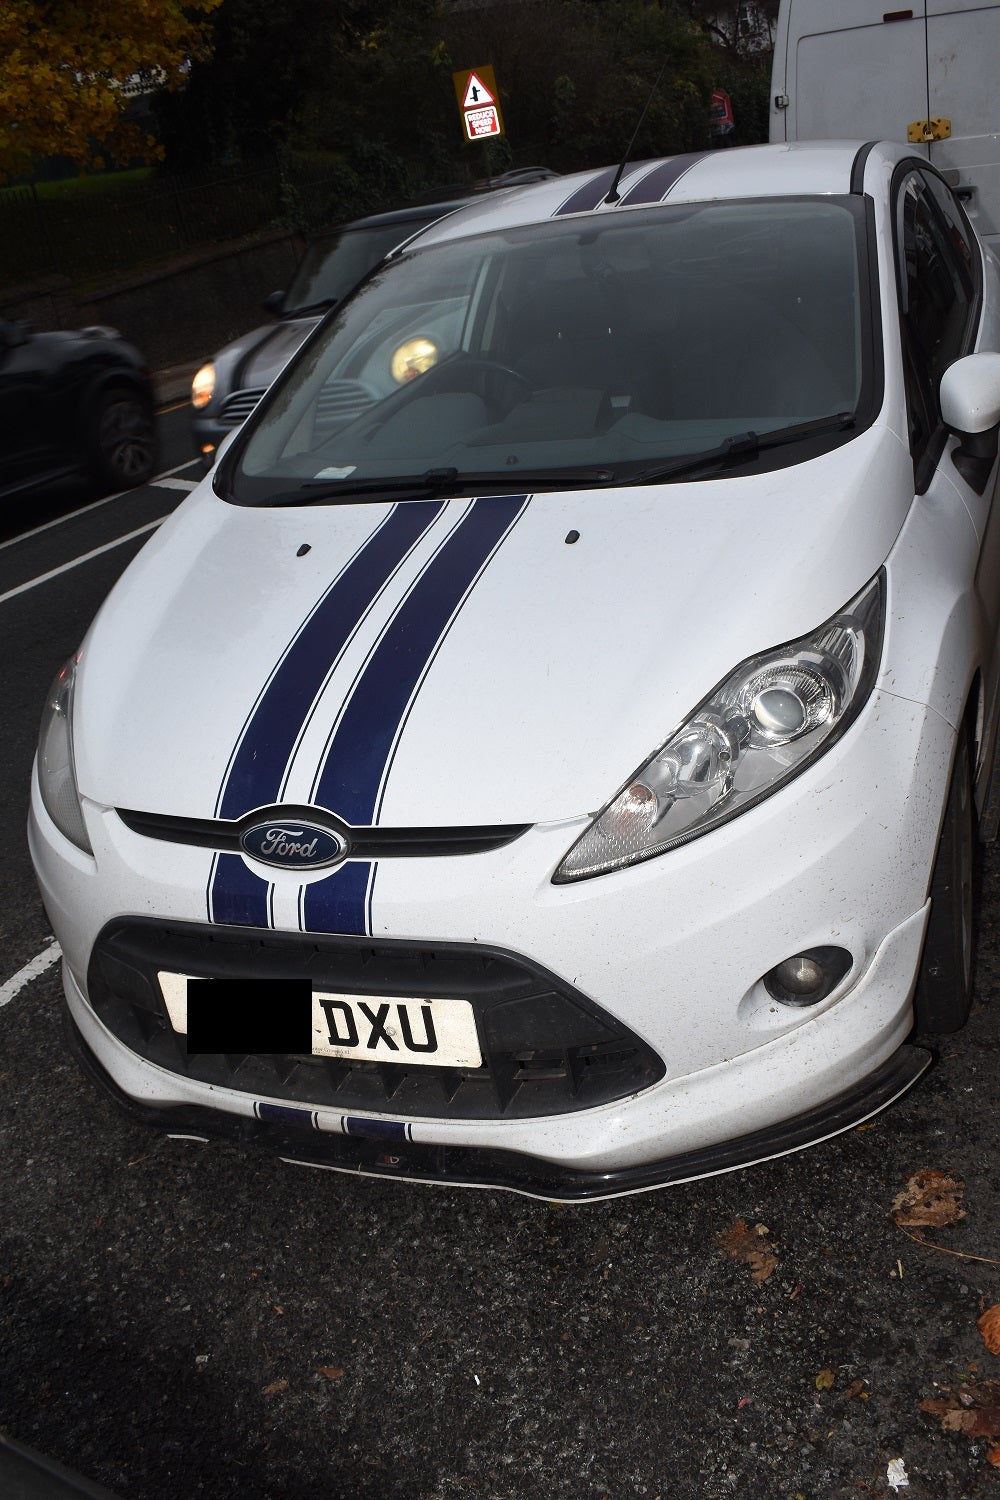 Police have appealed for anyone who saw this Ford Fiesta on Tuesday evening to come forward